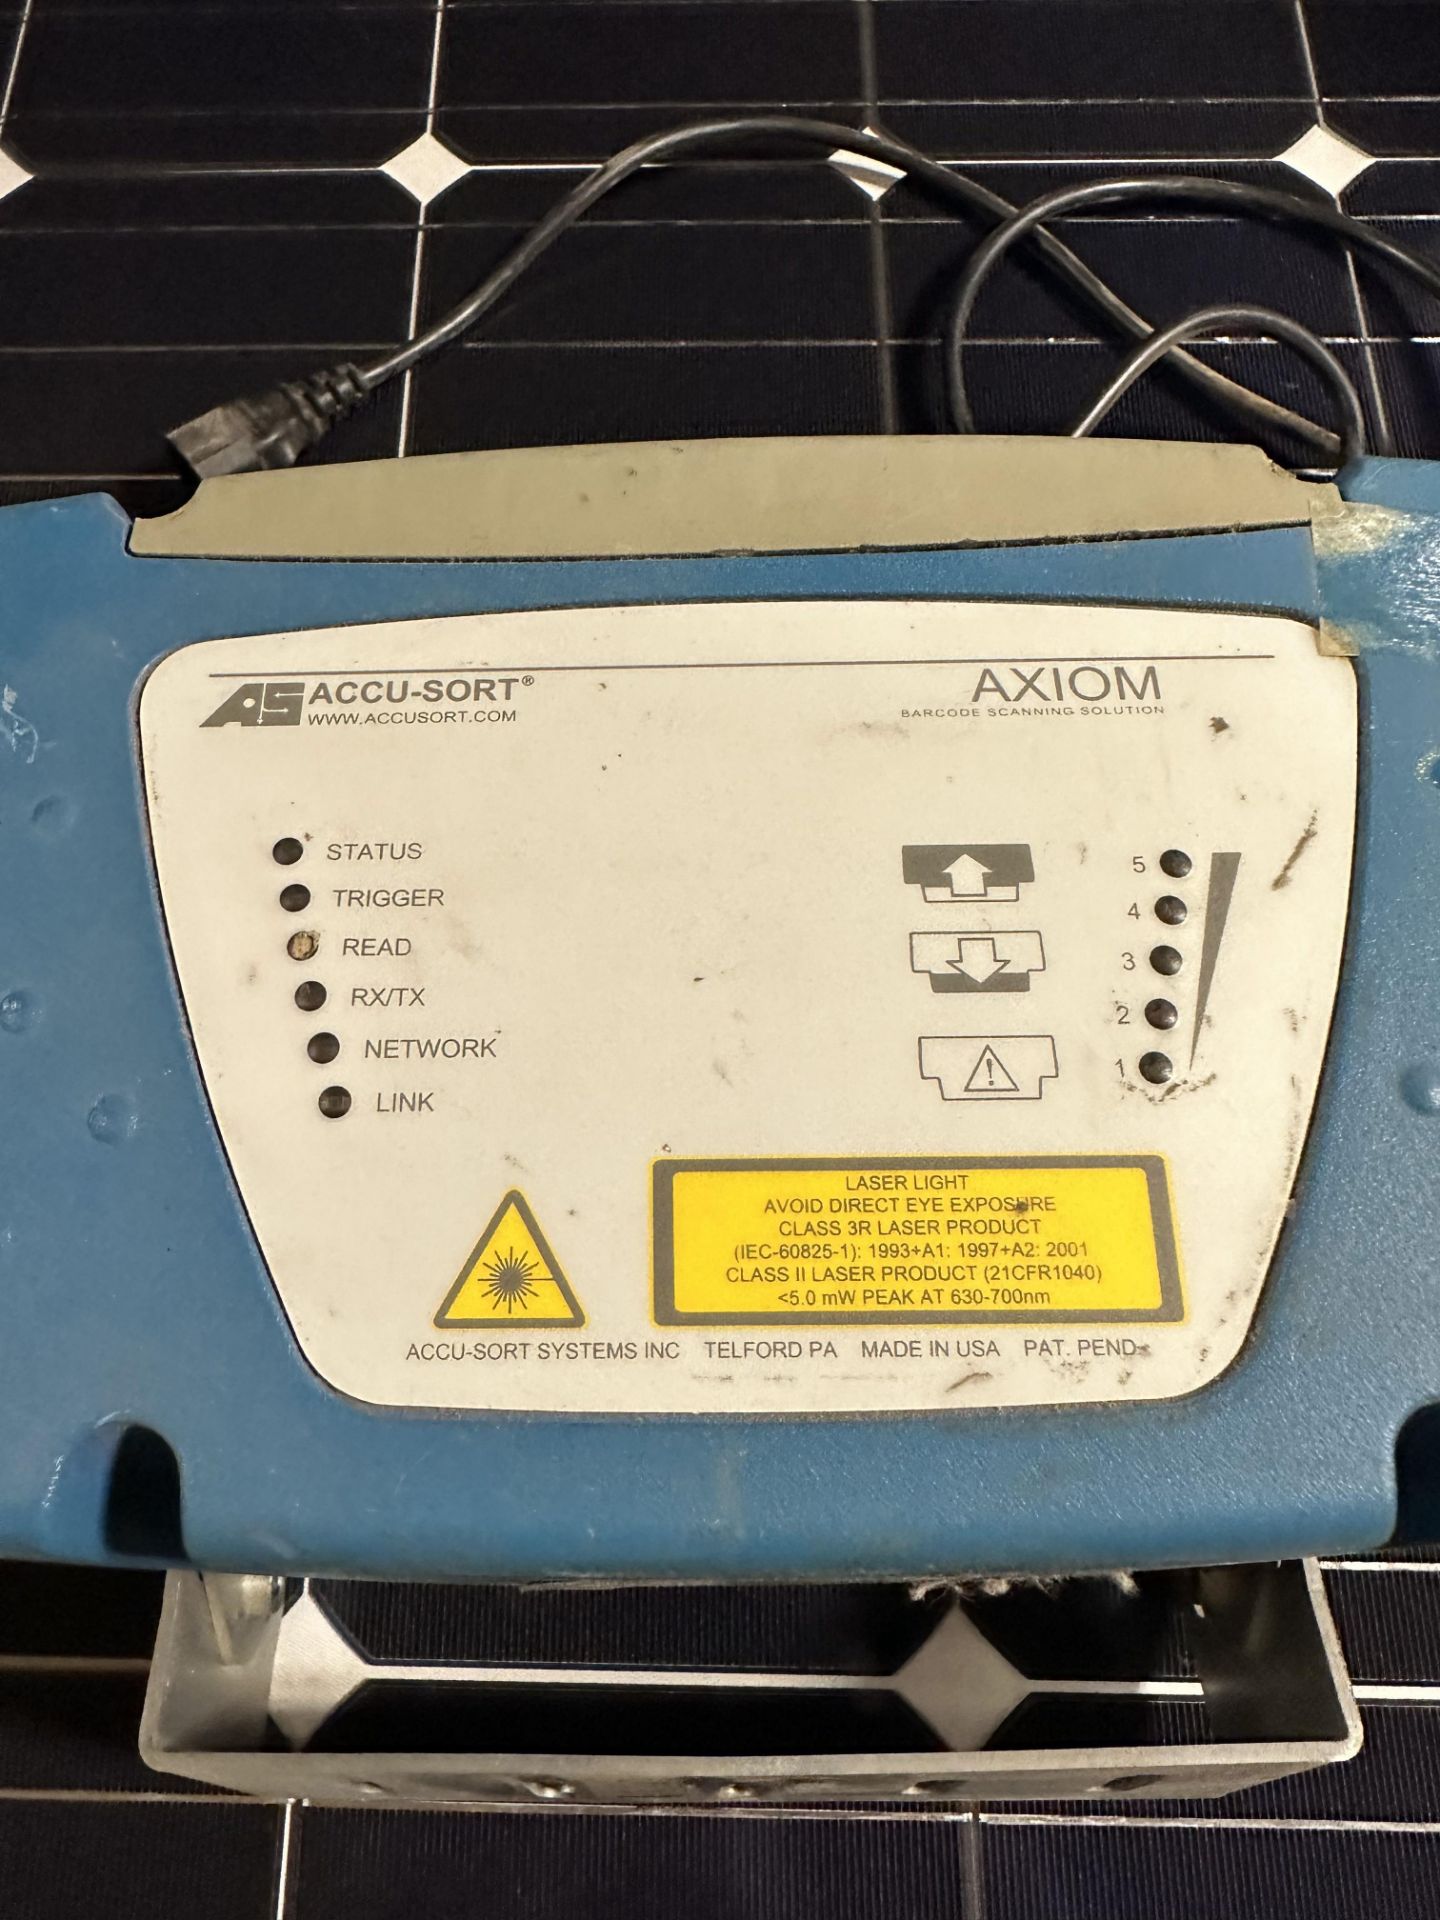 AXIOM ACCU-SORT PS-4024 BARCODE SCANNER - Image 3 of 5